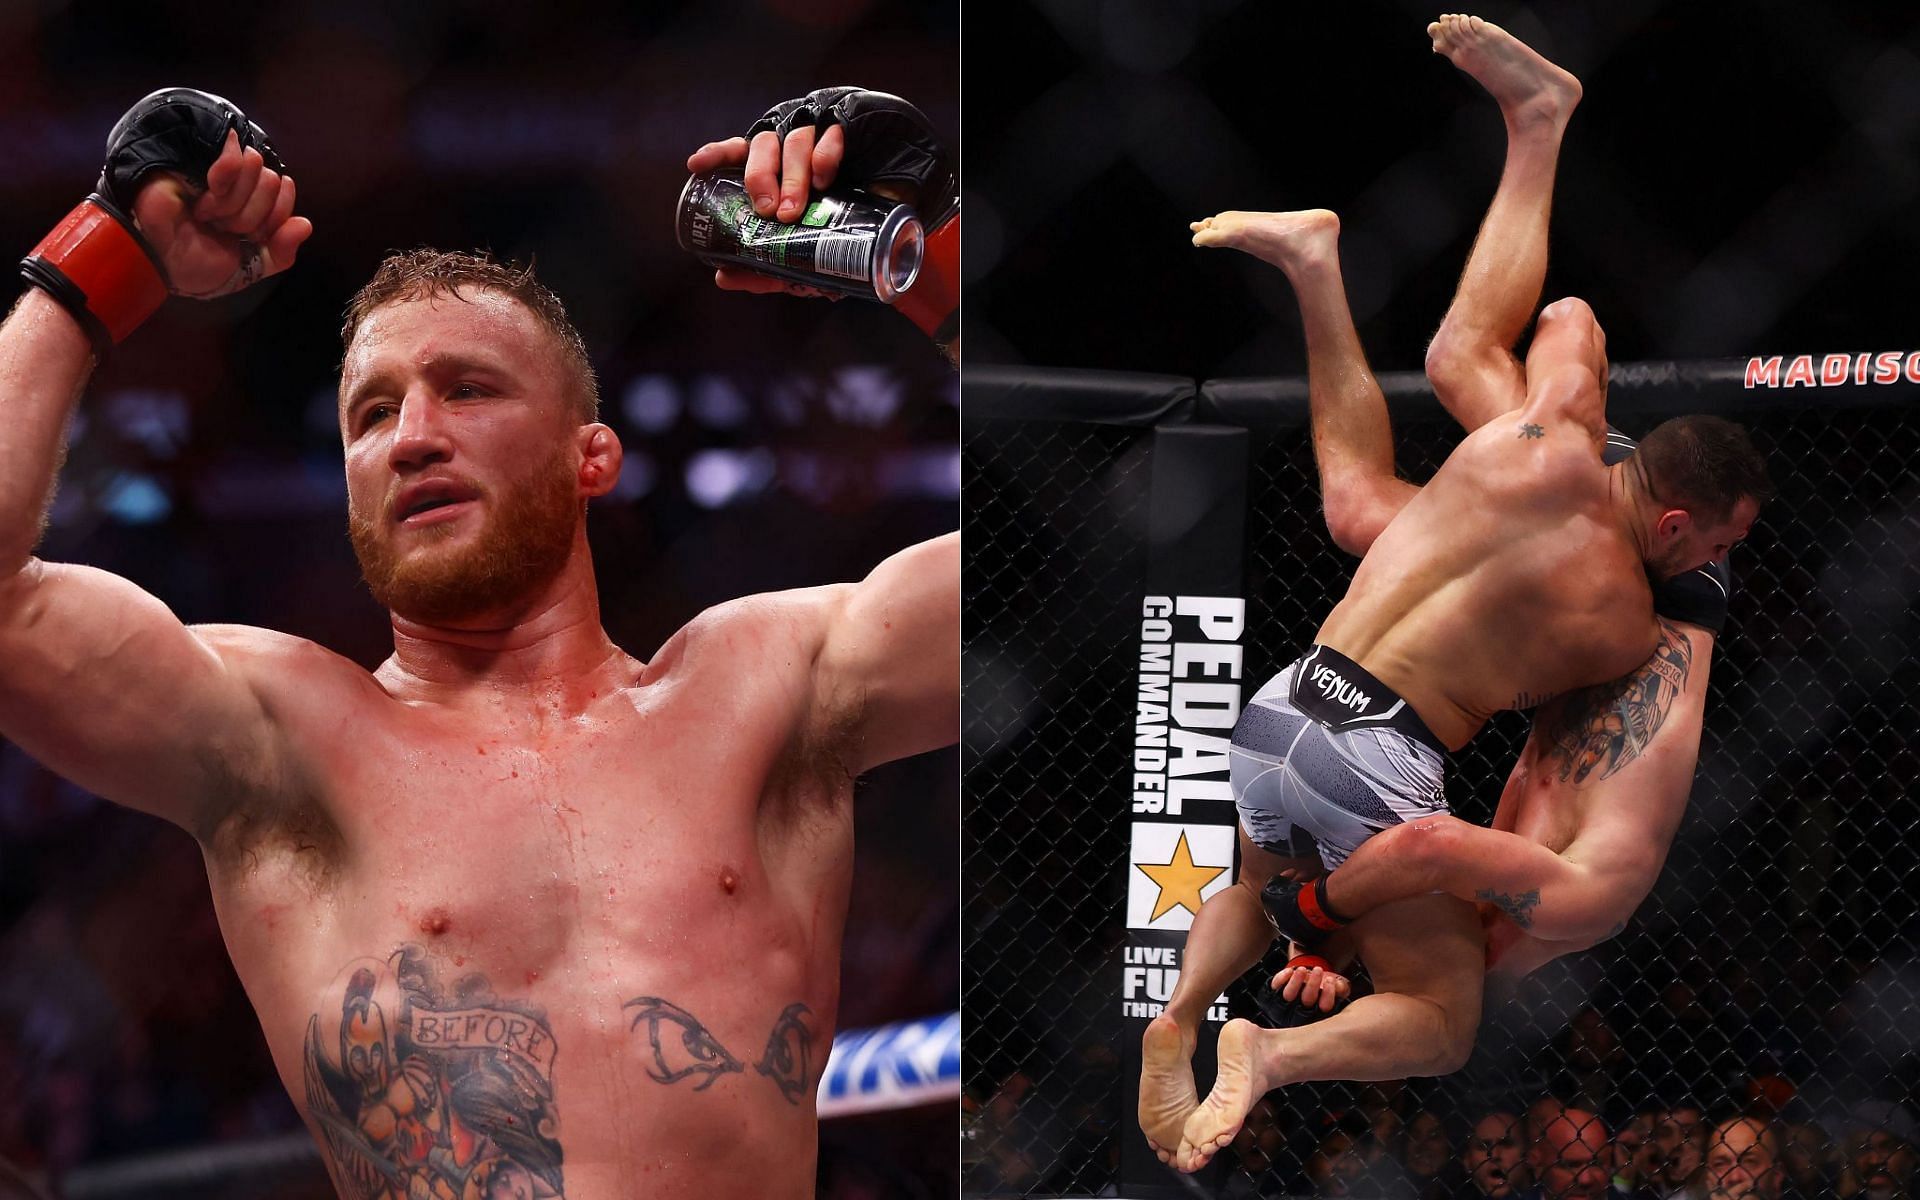 Justin Gaethje and Michael Chandler went to war at UFC 268